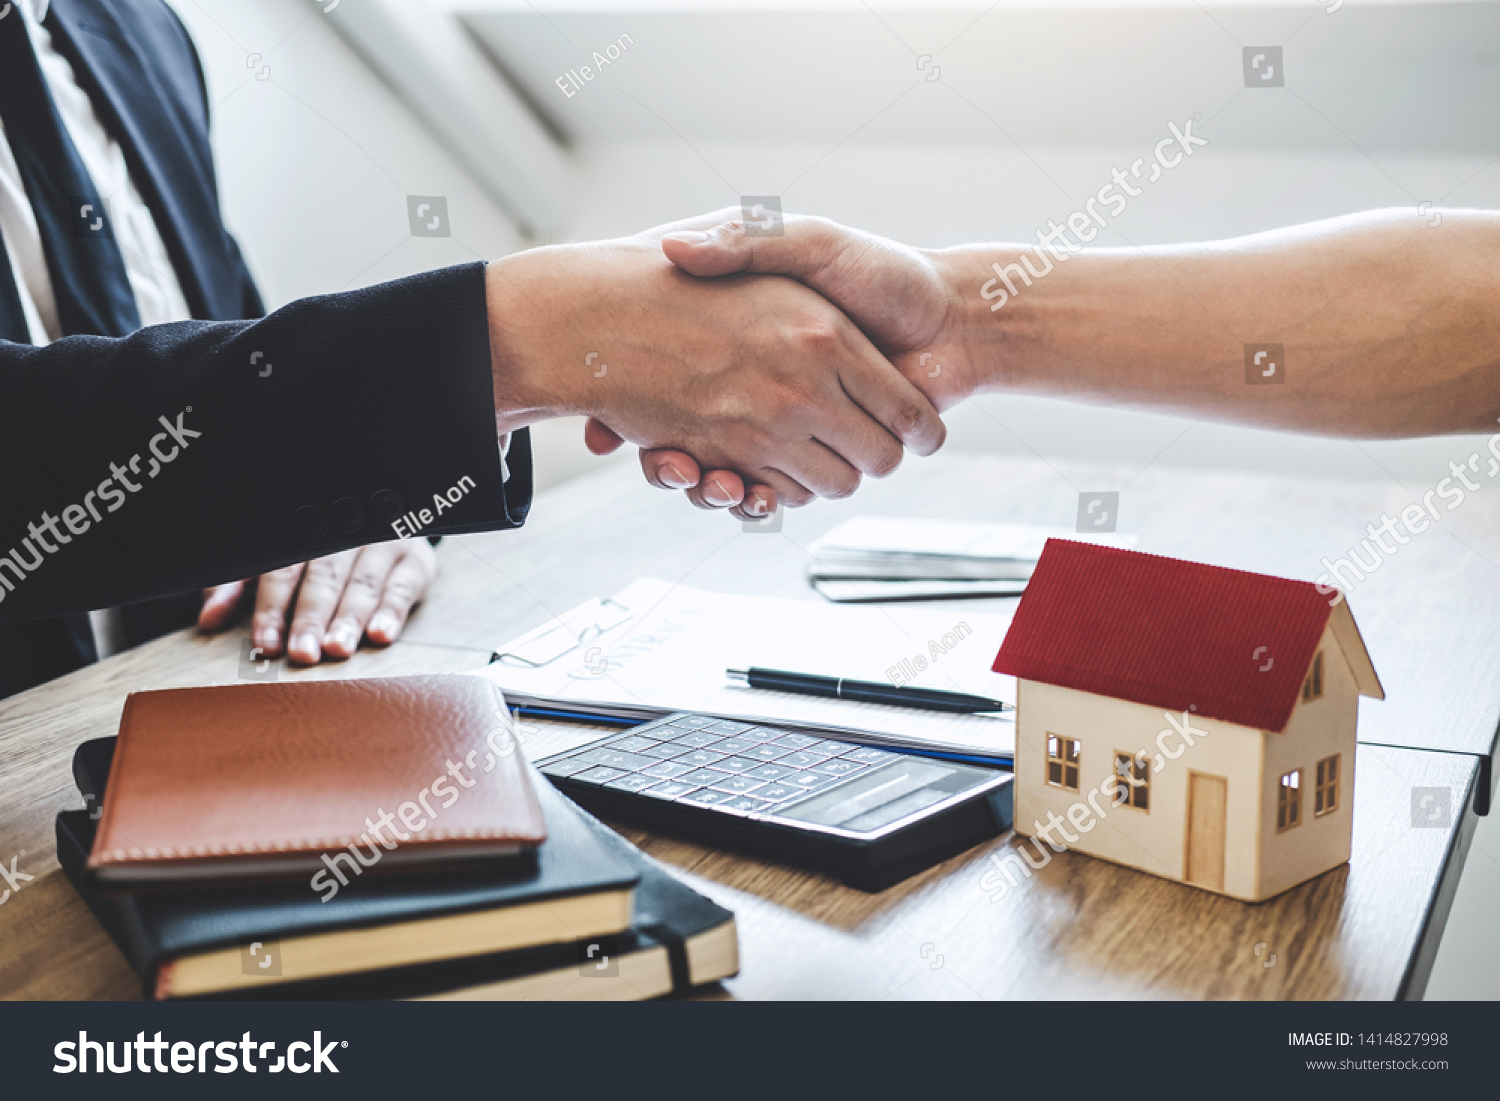 Finishing to successful deal of real estate, Broker and client shaking hands after signing contract approved application form, concerning mortgage loan offer for and house insurance. #1414827998